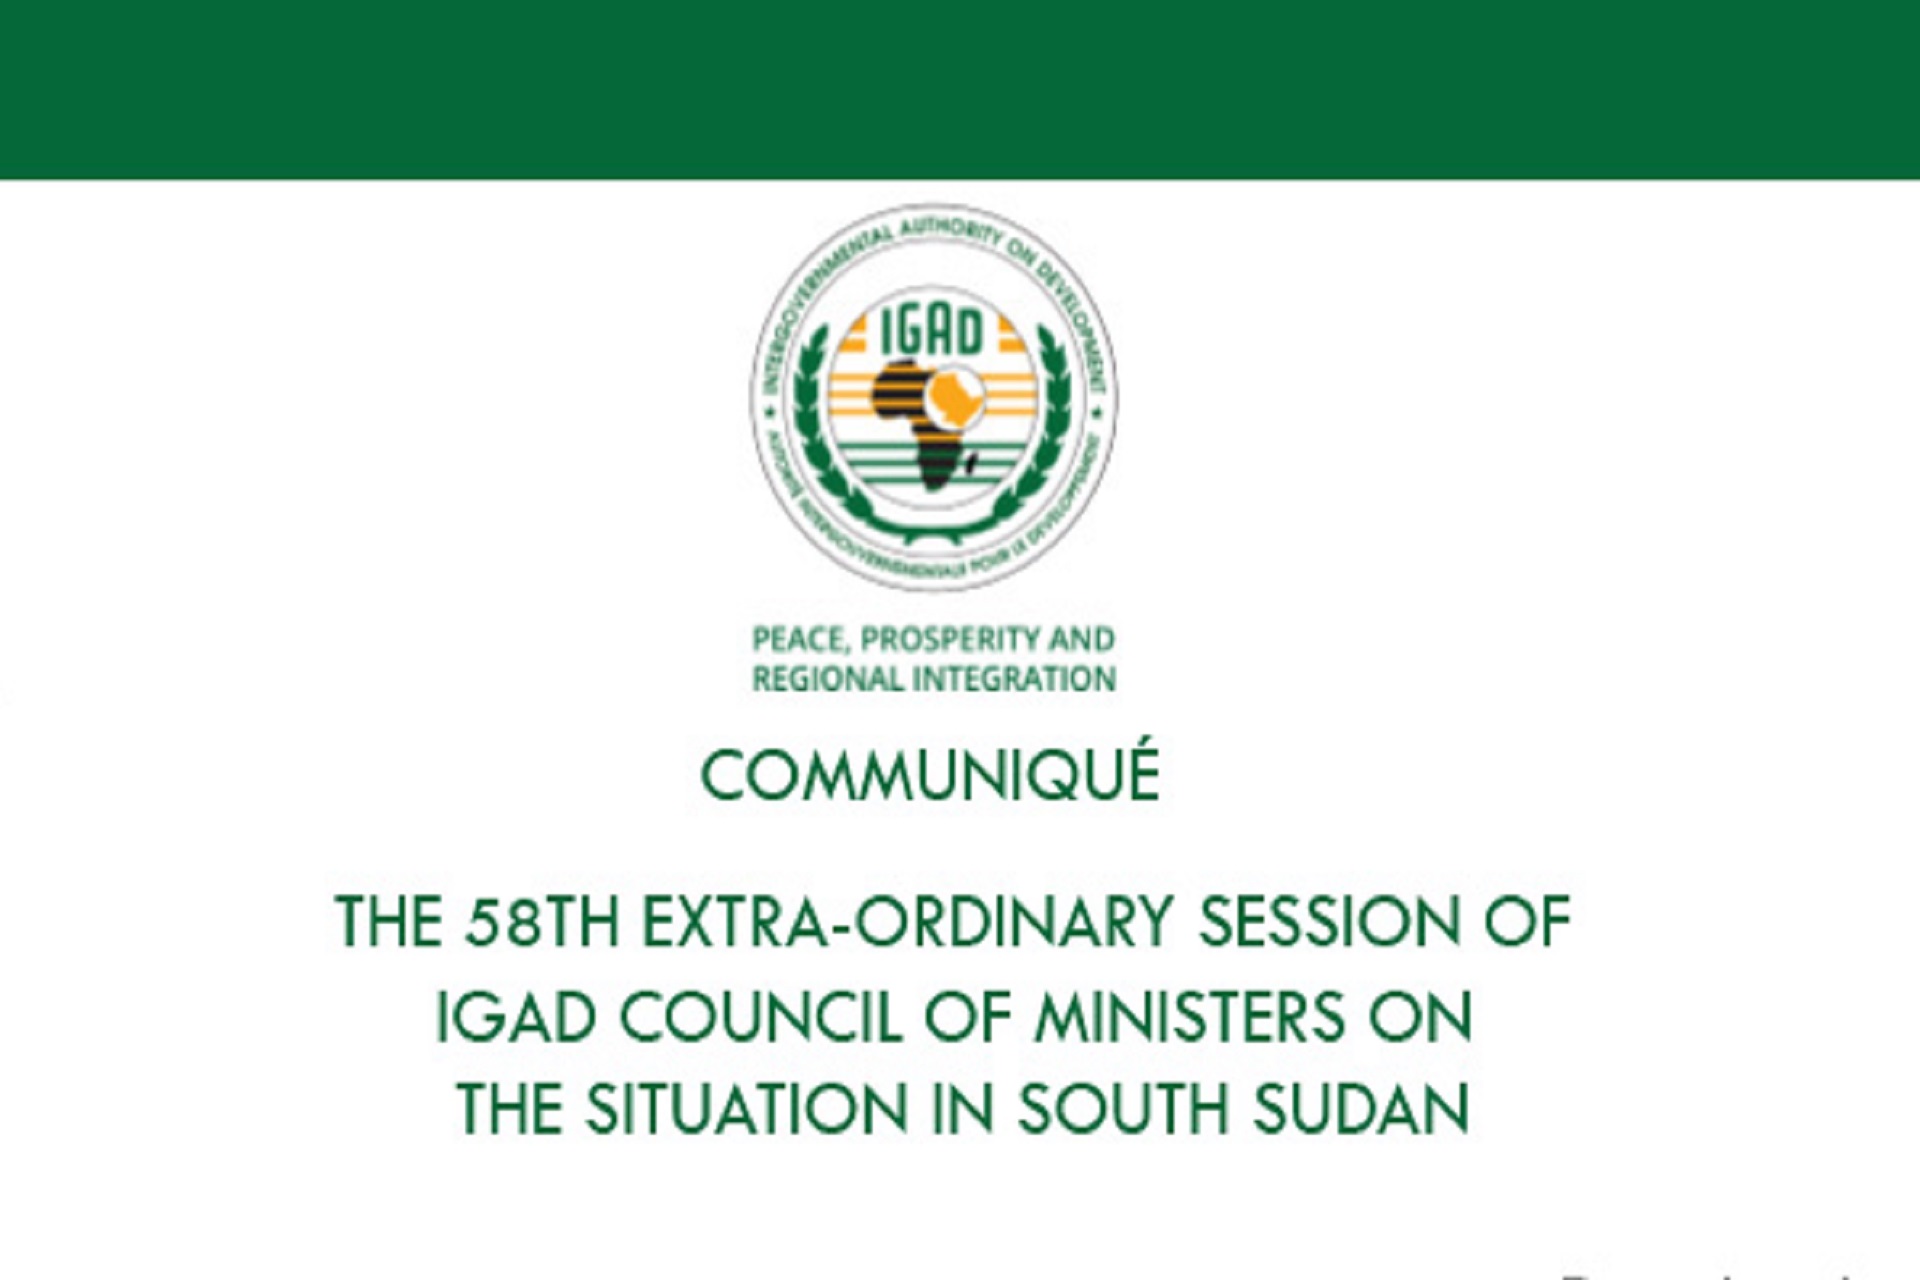 COMMUNIQUÉ OF THE 58TH EXTRA-ORDINARY SESSION OF IGAD COUNCIL OF MINISTERS ON THE SITUATION IN SOUTH SUDAN